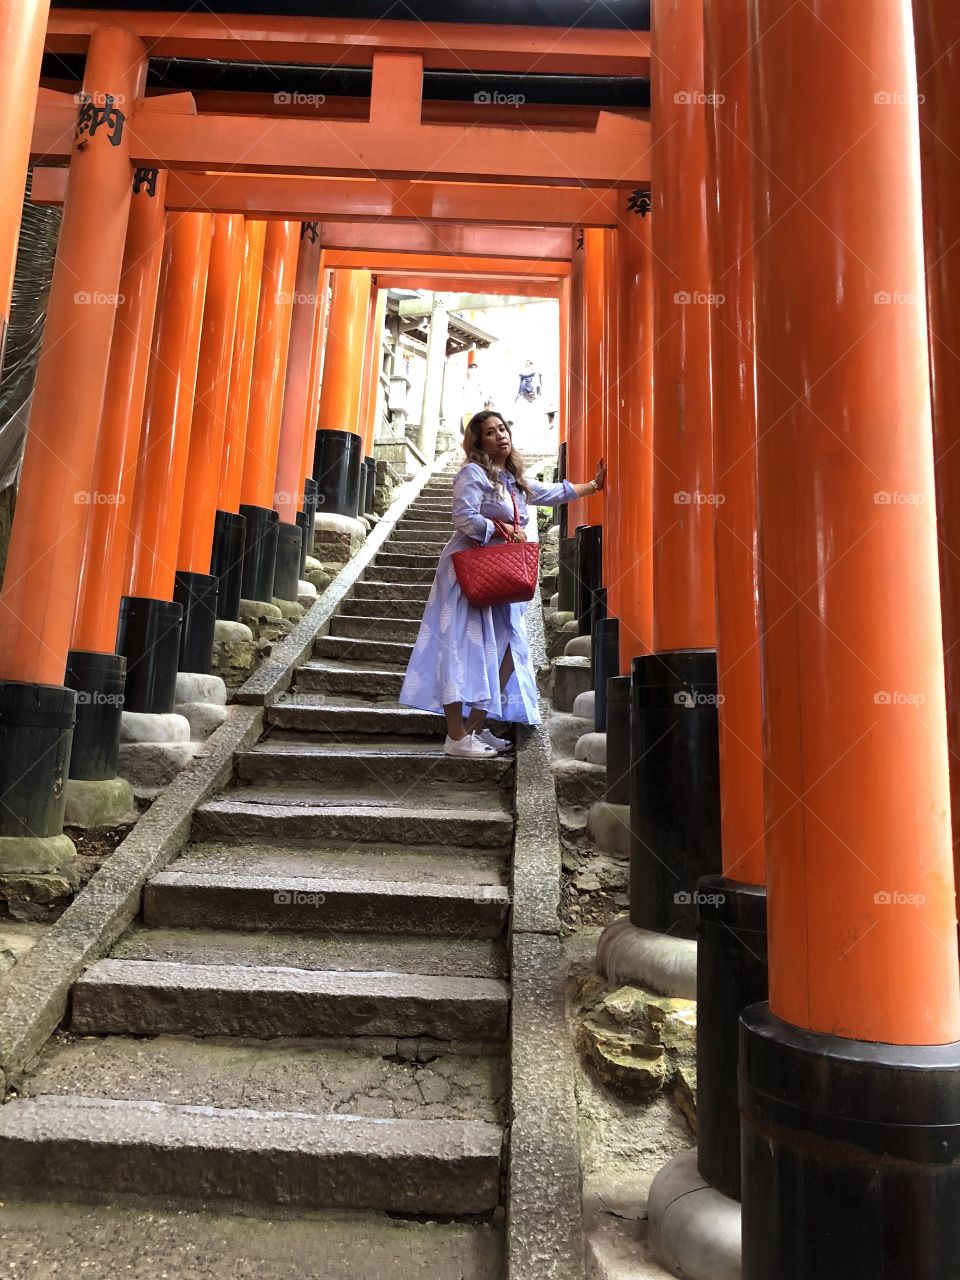 Climbing the 10,000 stairs temple of Kyoto,Japan.make you fit and calories taken instantly.let’s go let be healthier fit for life.